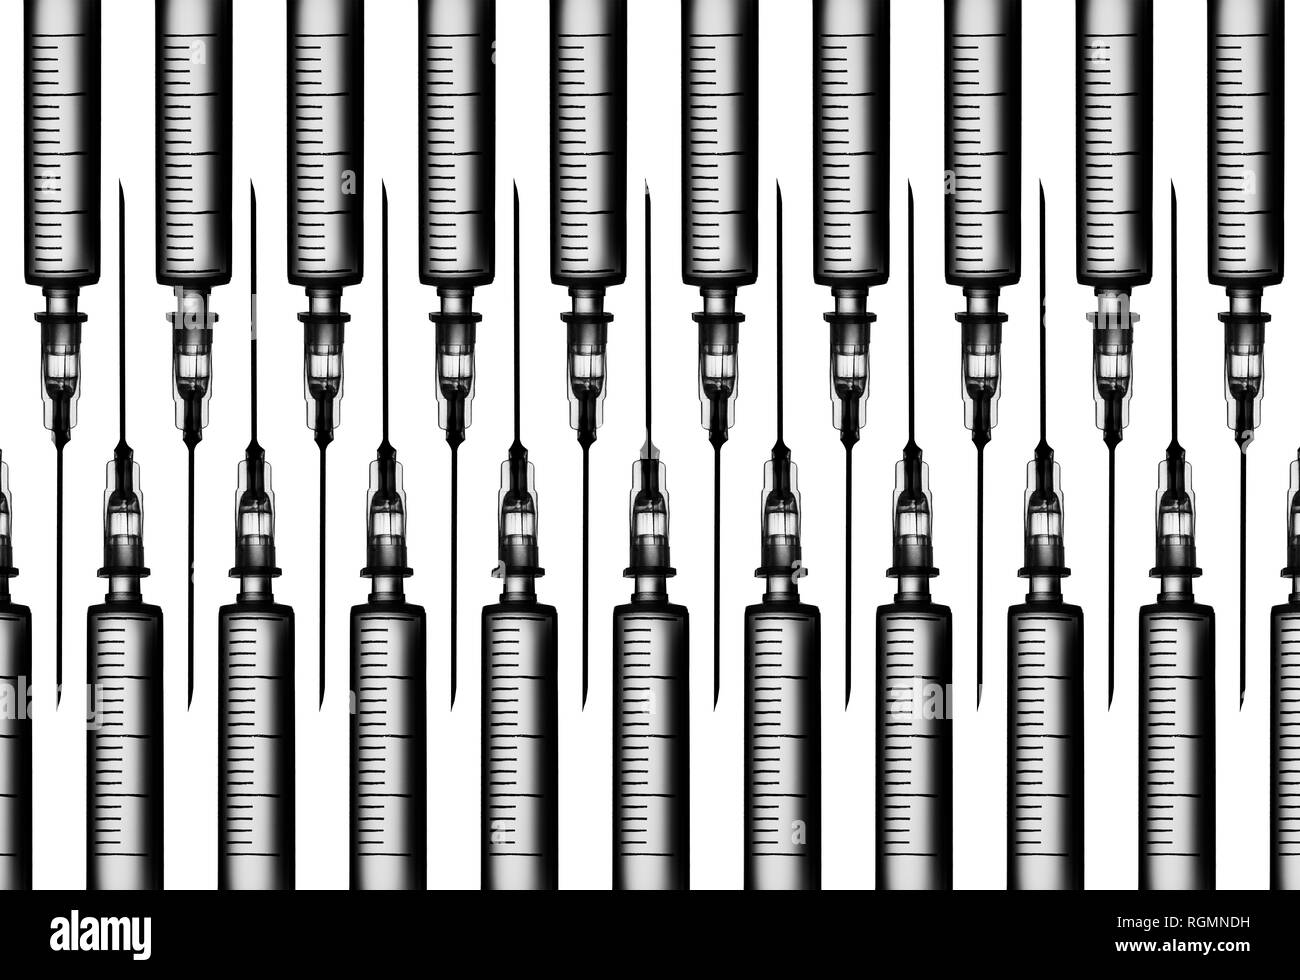 Multiple syringes organized in a pattern over white background Stock Photo